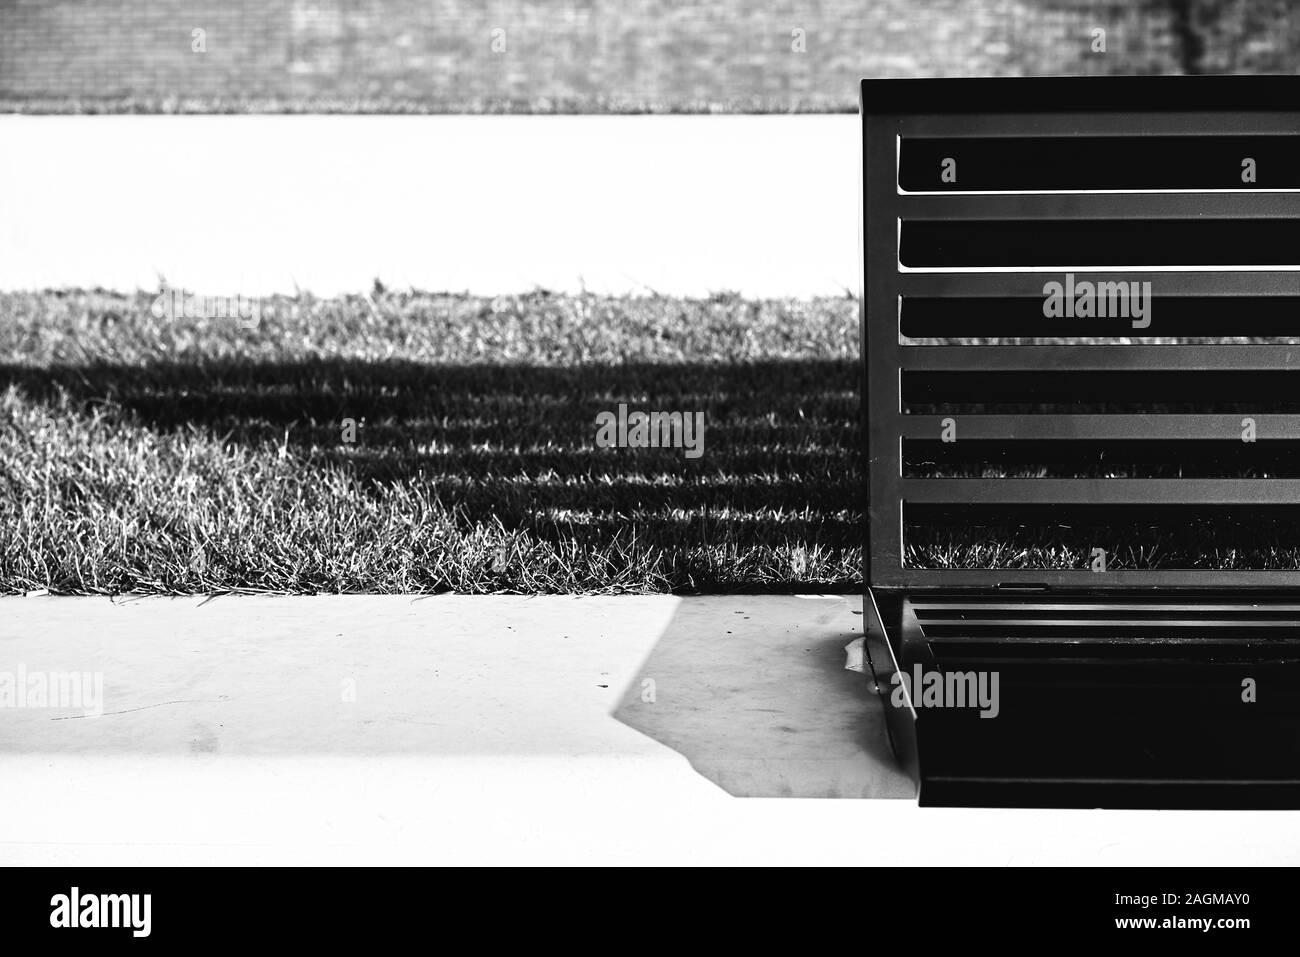 Closeup shot of a bench in front of a grassy patch Stock Photo